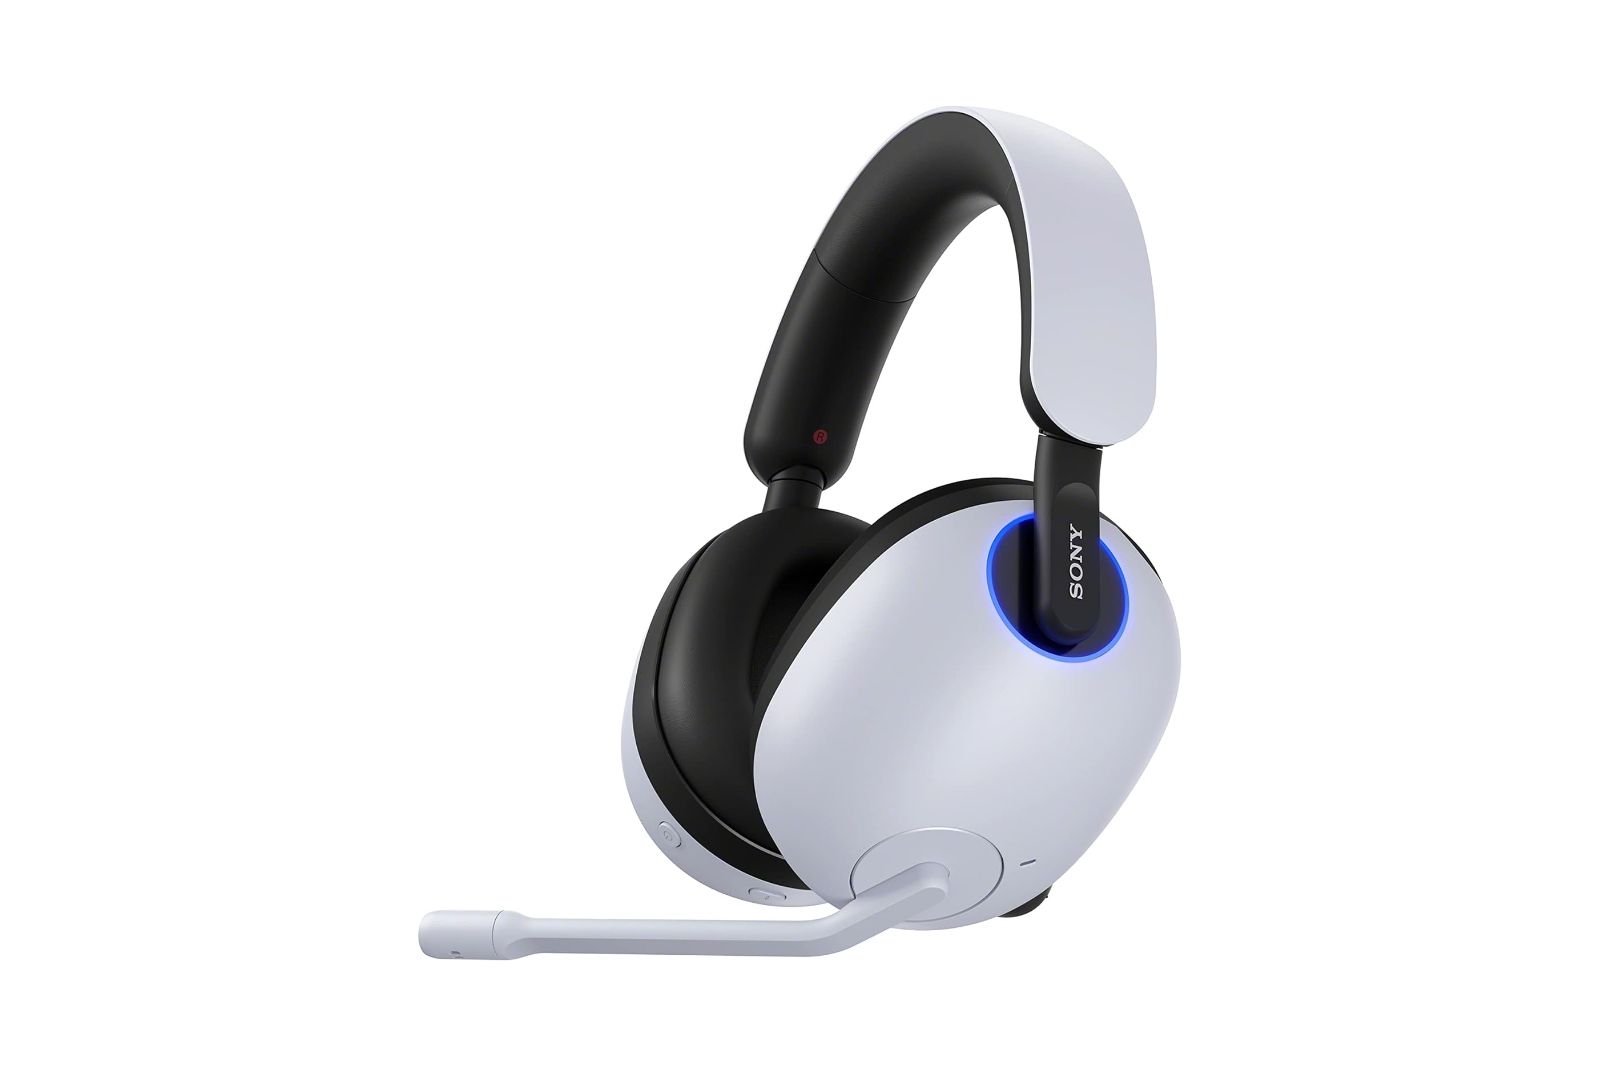 White headphones with black and blue accents and a mic arm.